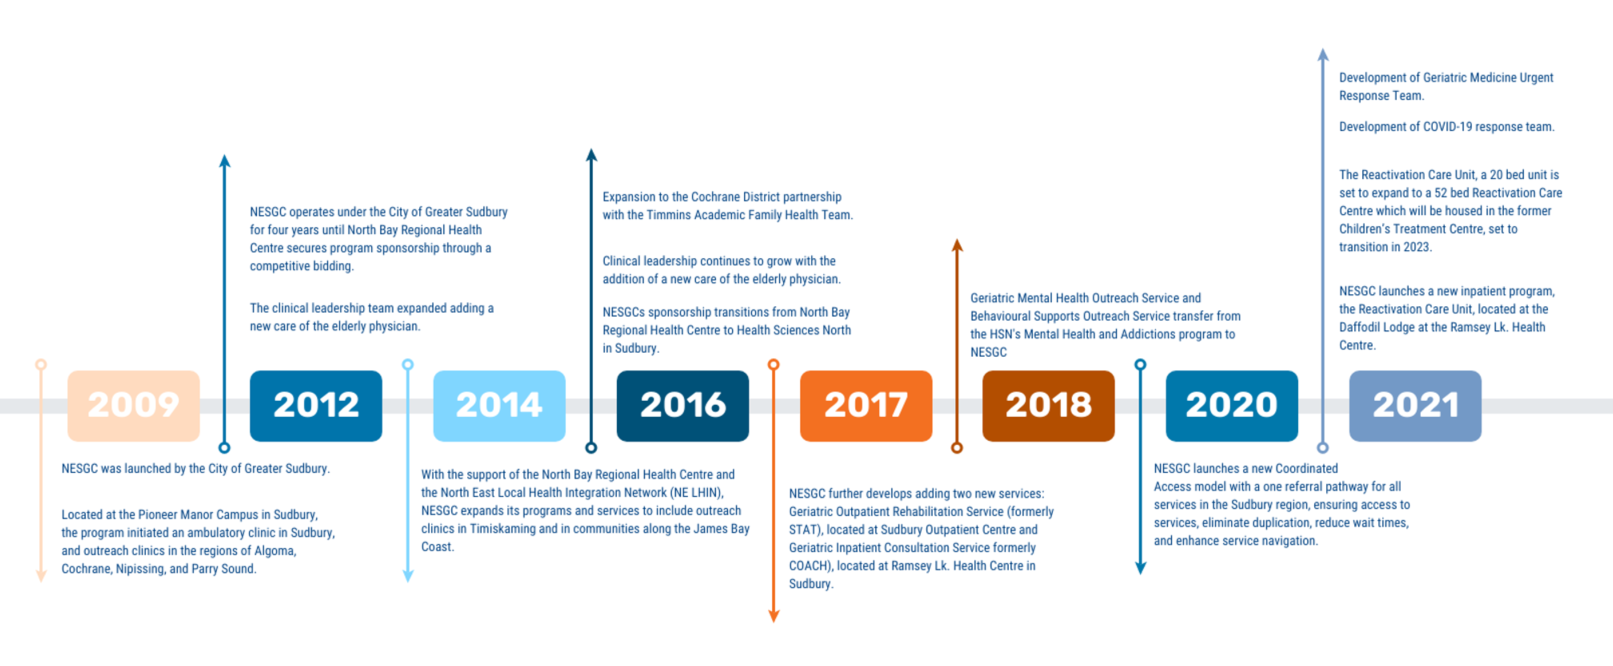 A timeline of the history of NESGC as described below.